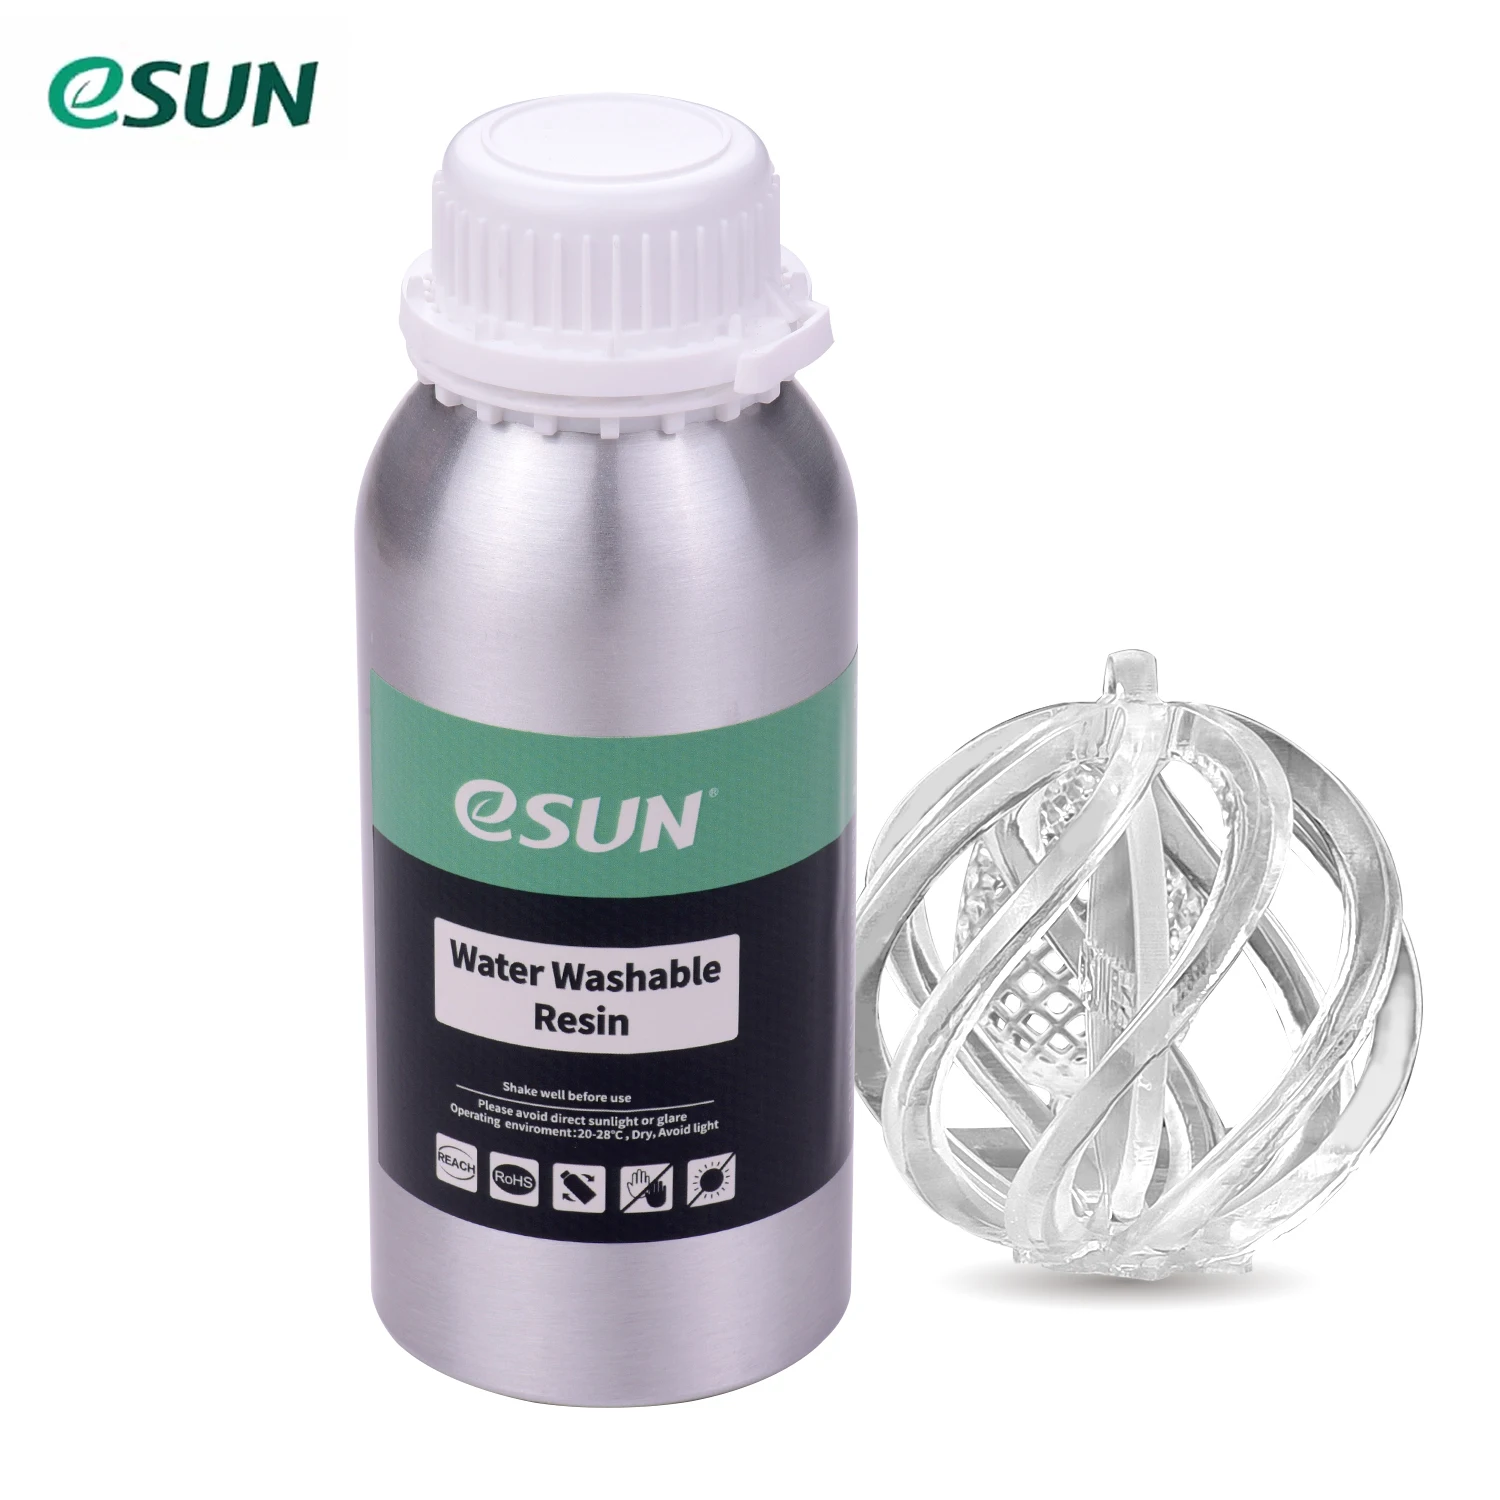 eSUN Water Washable Resin for LCD 3D Printer Consumables 500g/Bottle F3I5 